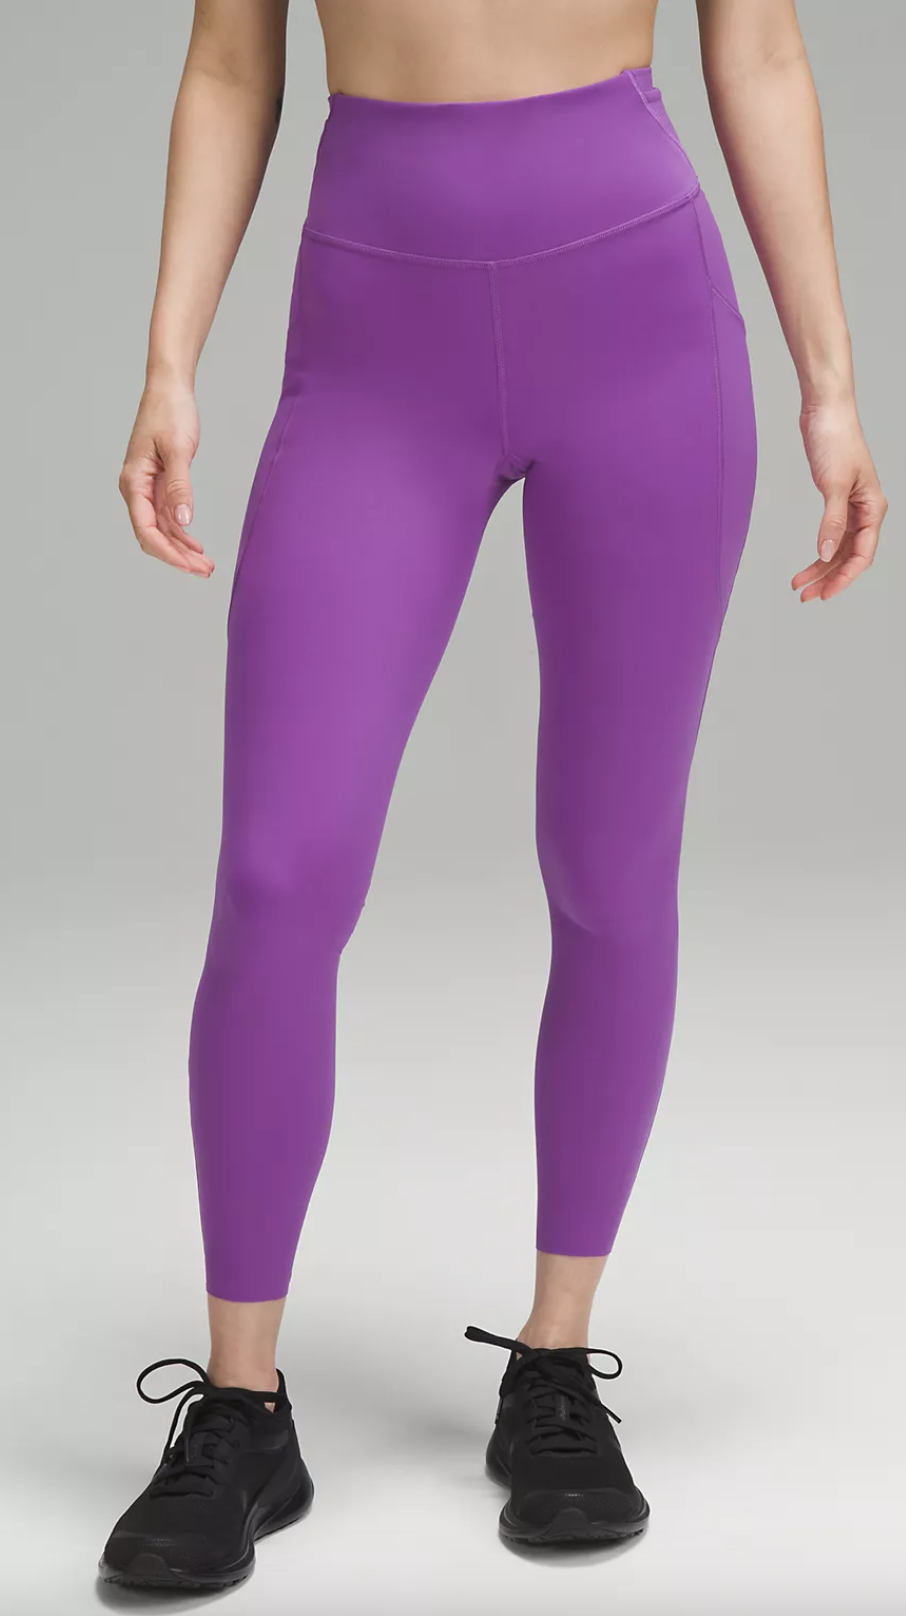 Lululemon Fast and Free High-Rise Tight 25” Pockets Updated